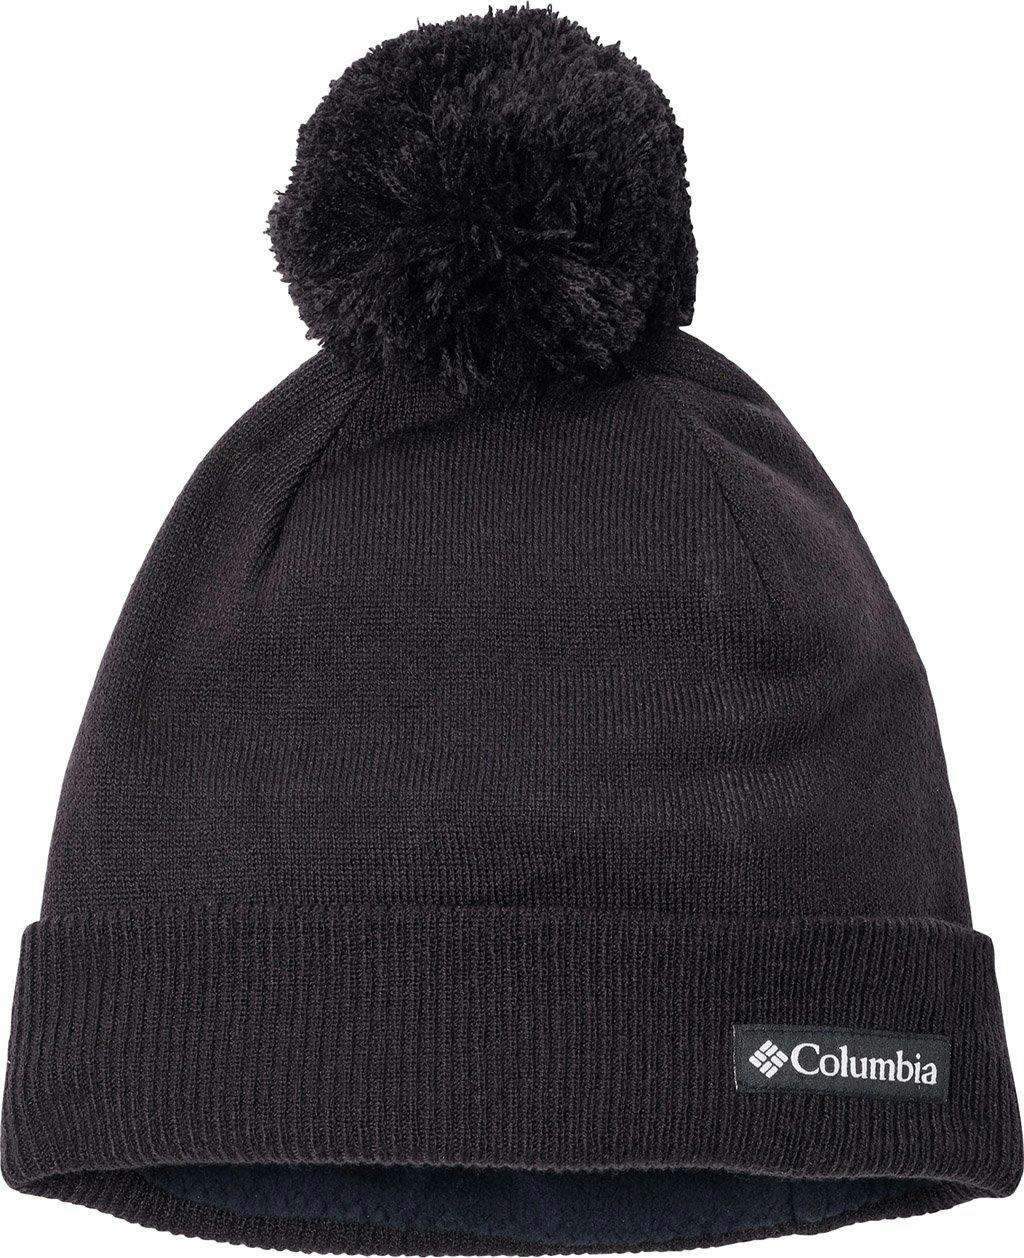 Product image for Youth Polar Powder Beanie - Kid's